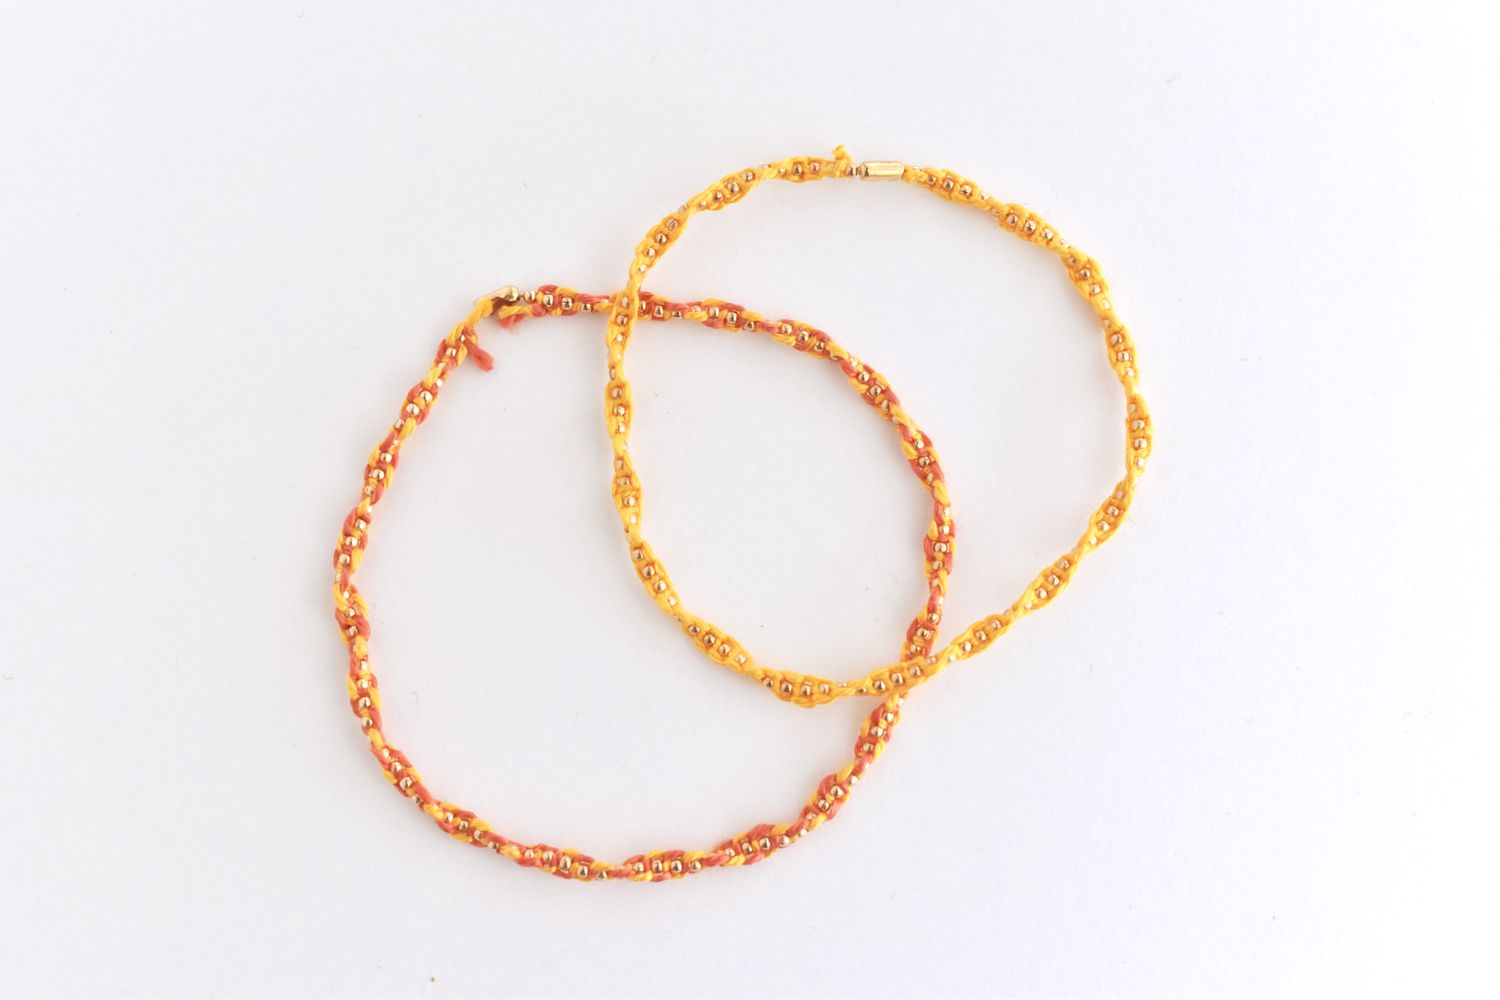 Knotted Chain Friendship Bracelets